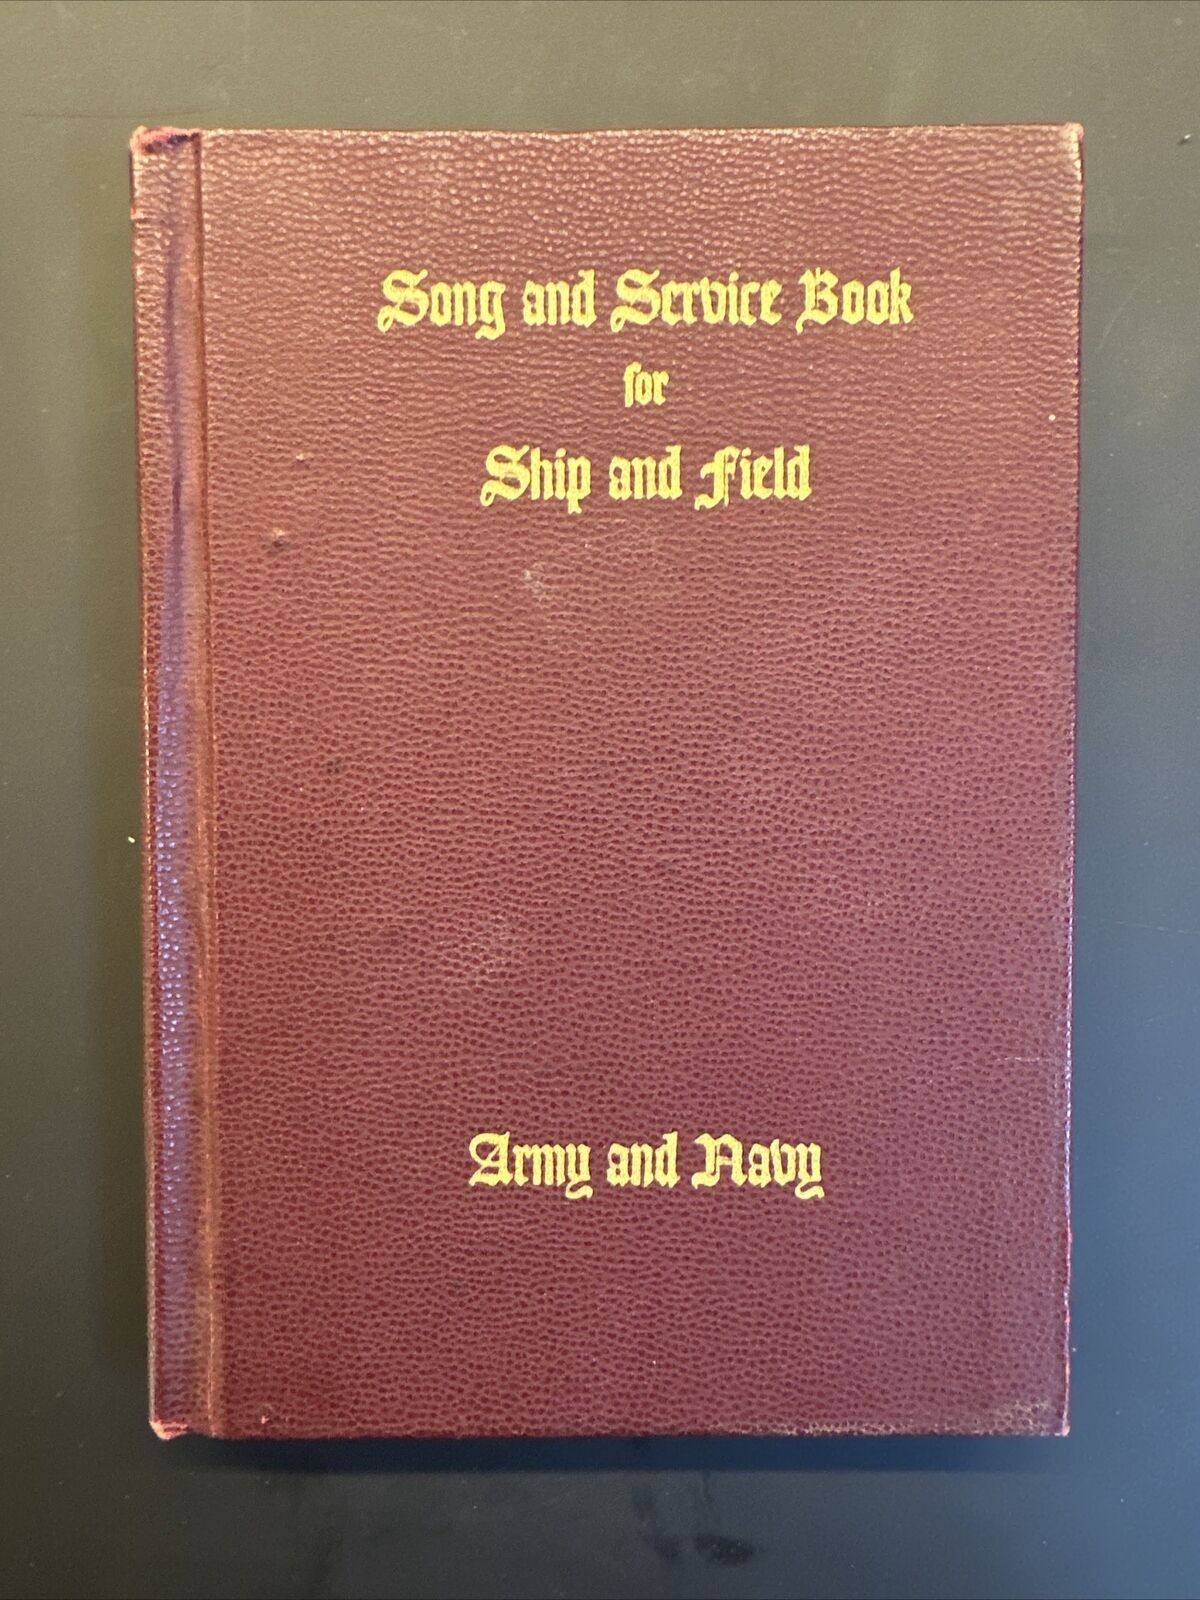 (1942) Song & Service Book for Ship and Field Army Navy World War II Vintage HC